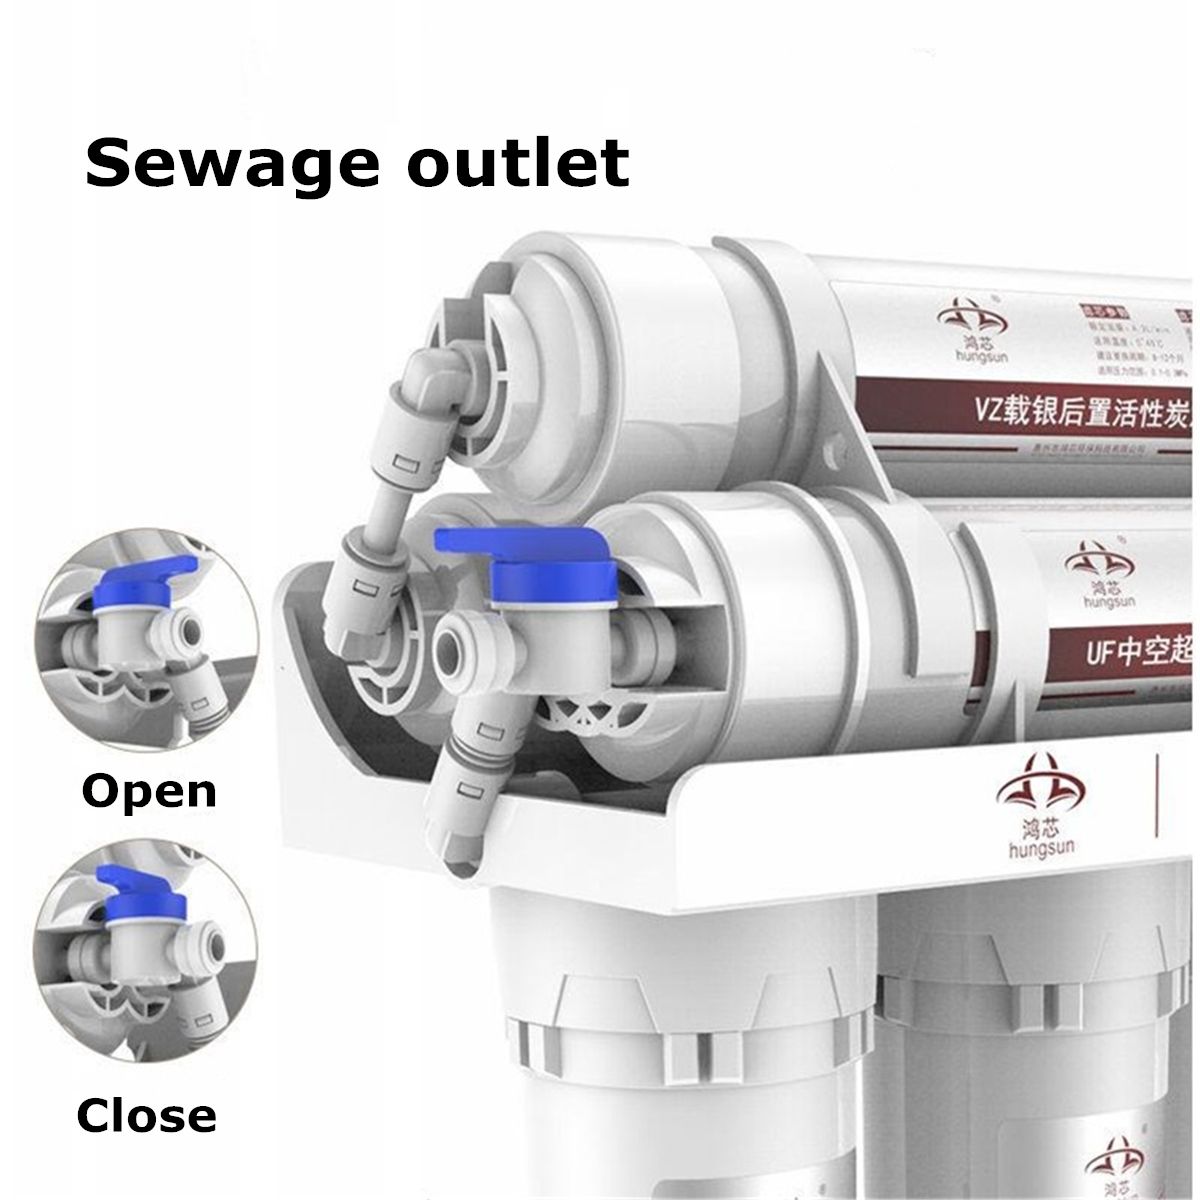 6-Stage-Water-Filter-System-With-Faucet-Valve-Home-Kitchen-Purifier-ABS-1473411